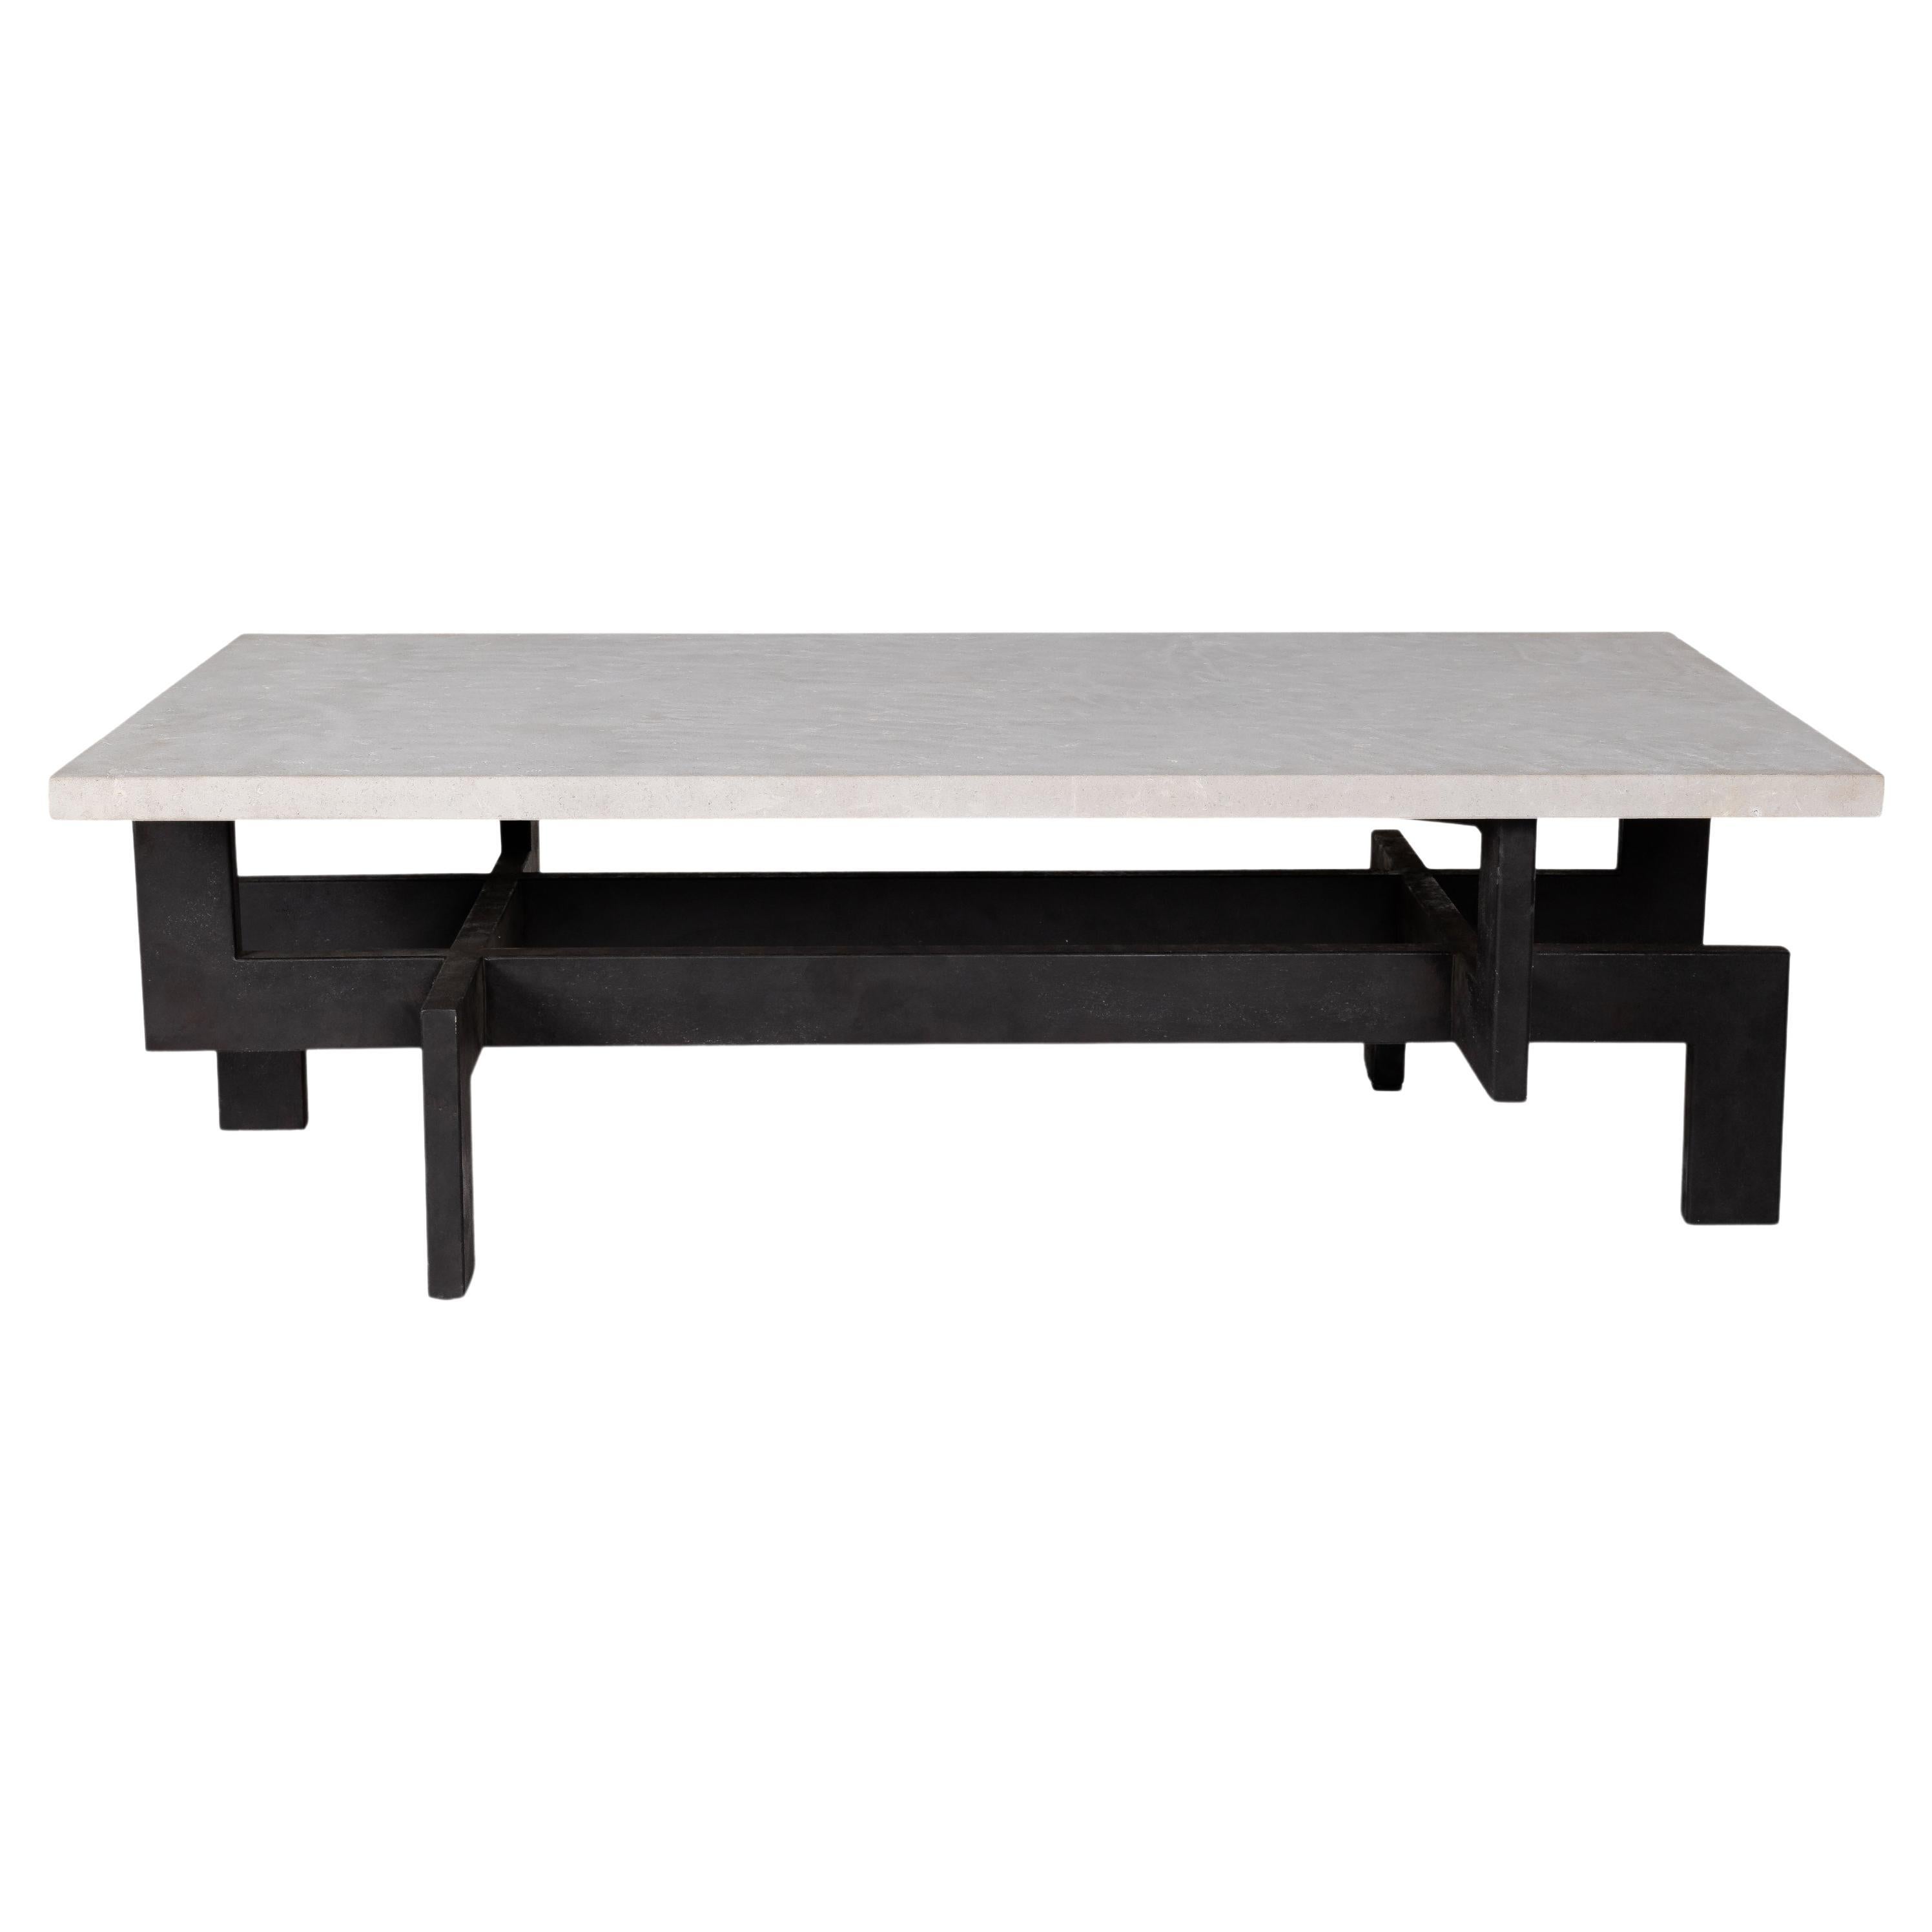 Modernist Patinaed Steel Coffee Table with Limestone Top For Sale